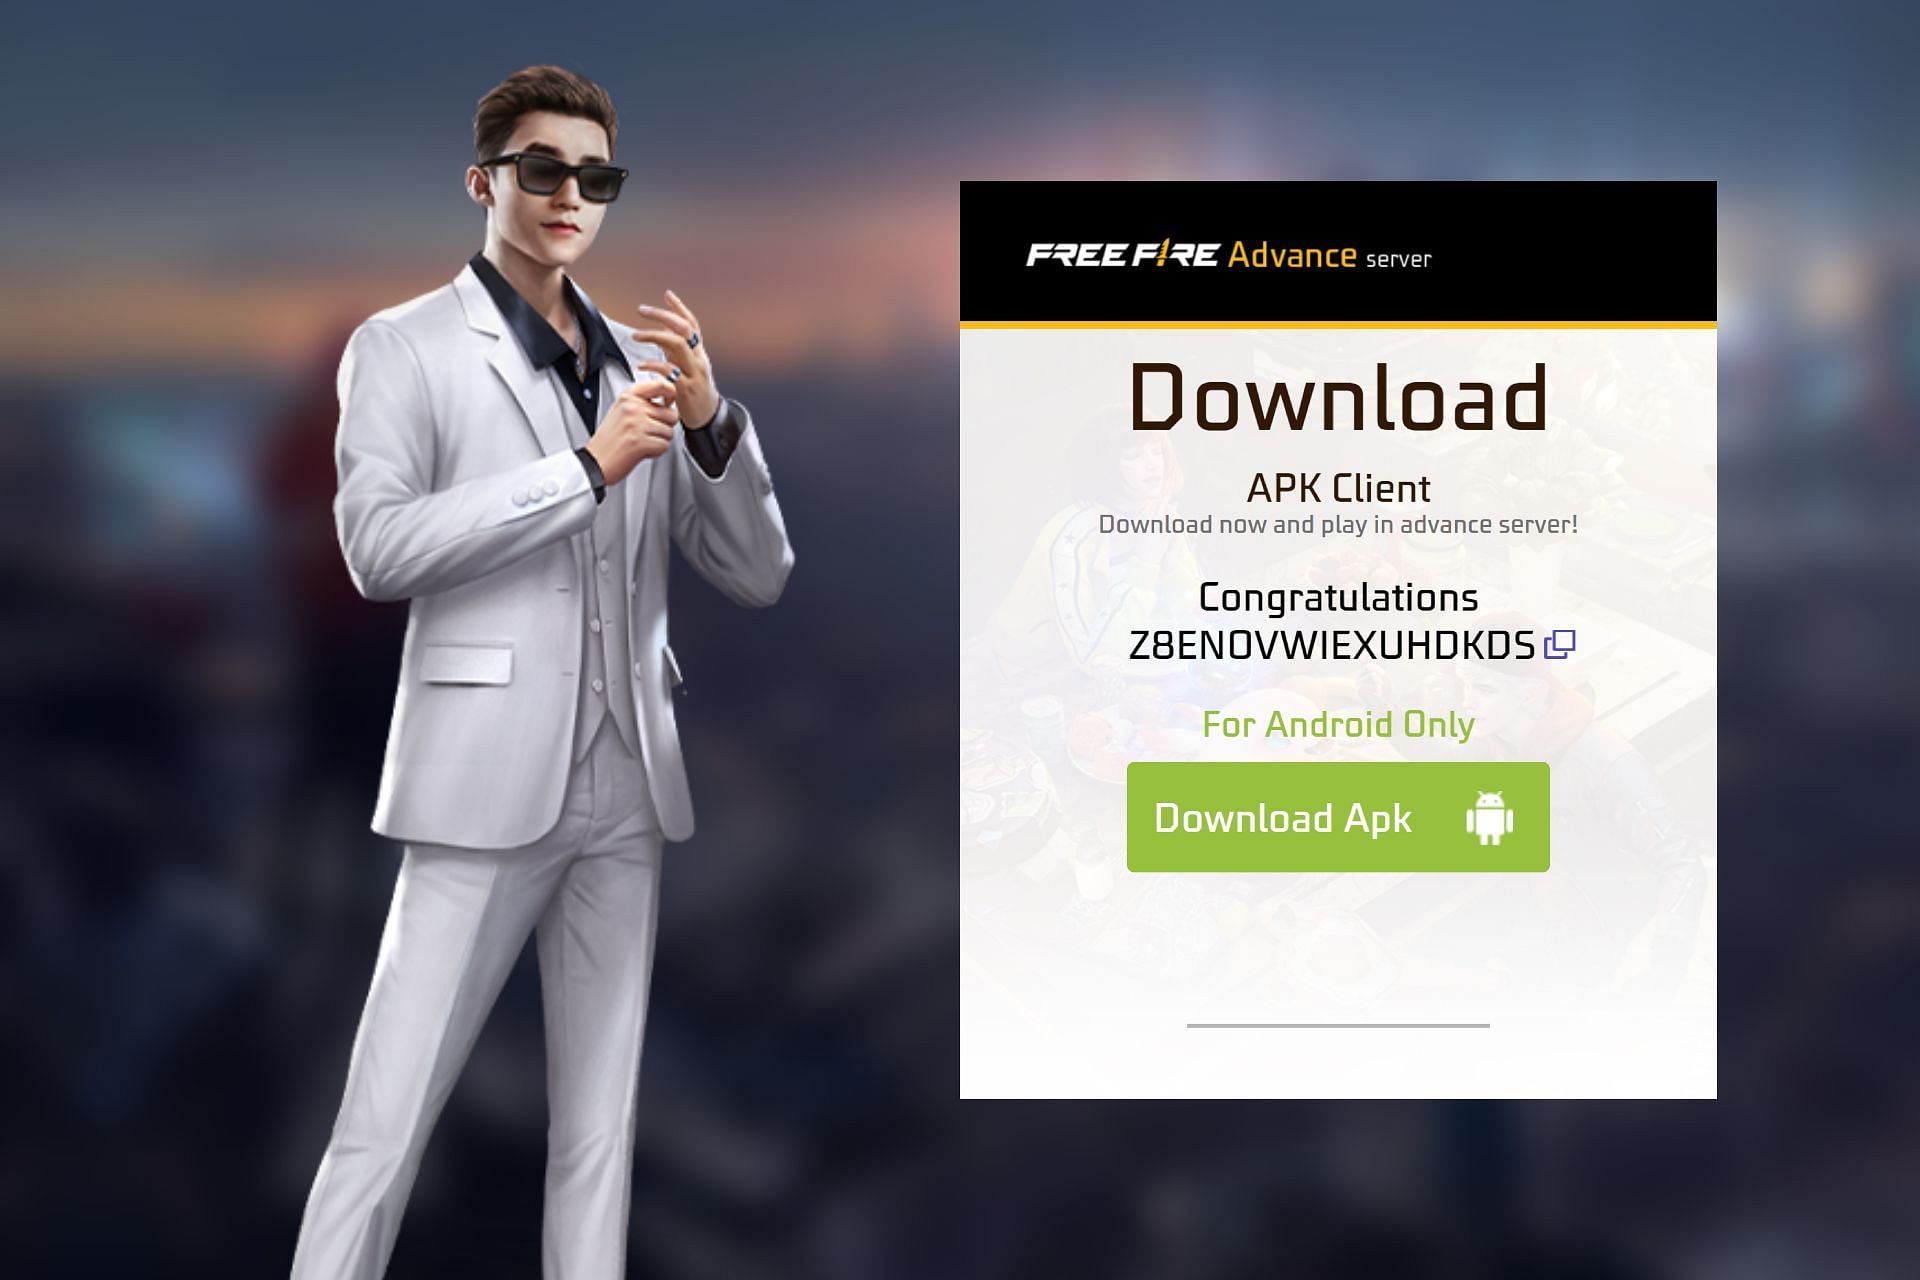 Free Fire Advance for Android - Download the APK from Uptodown